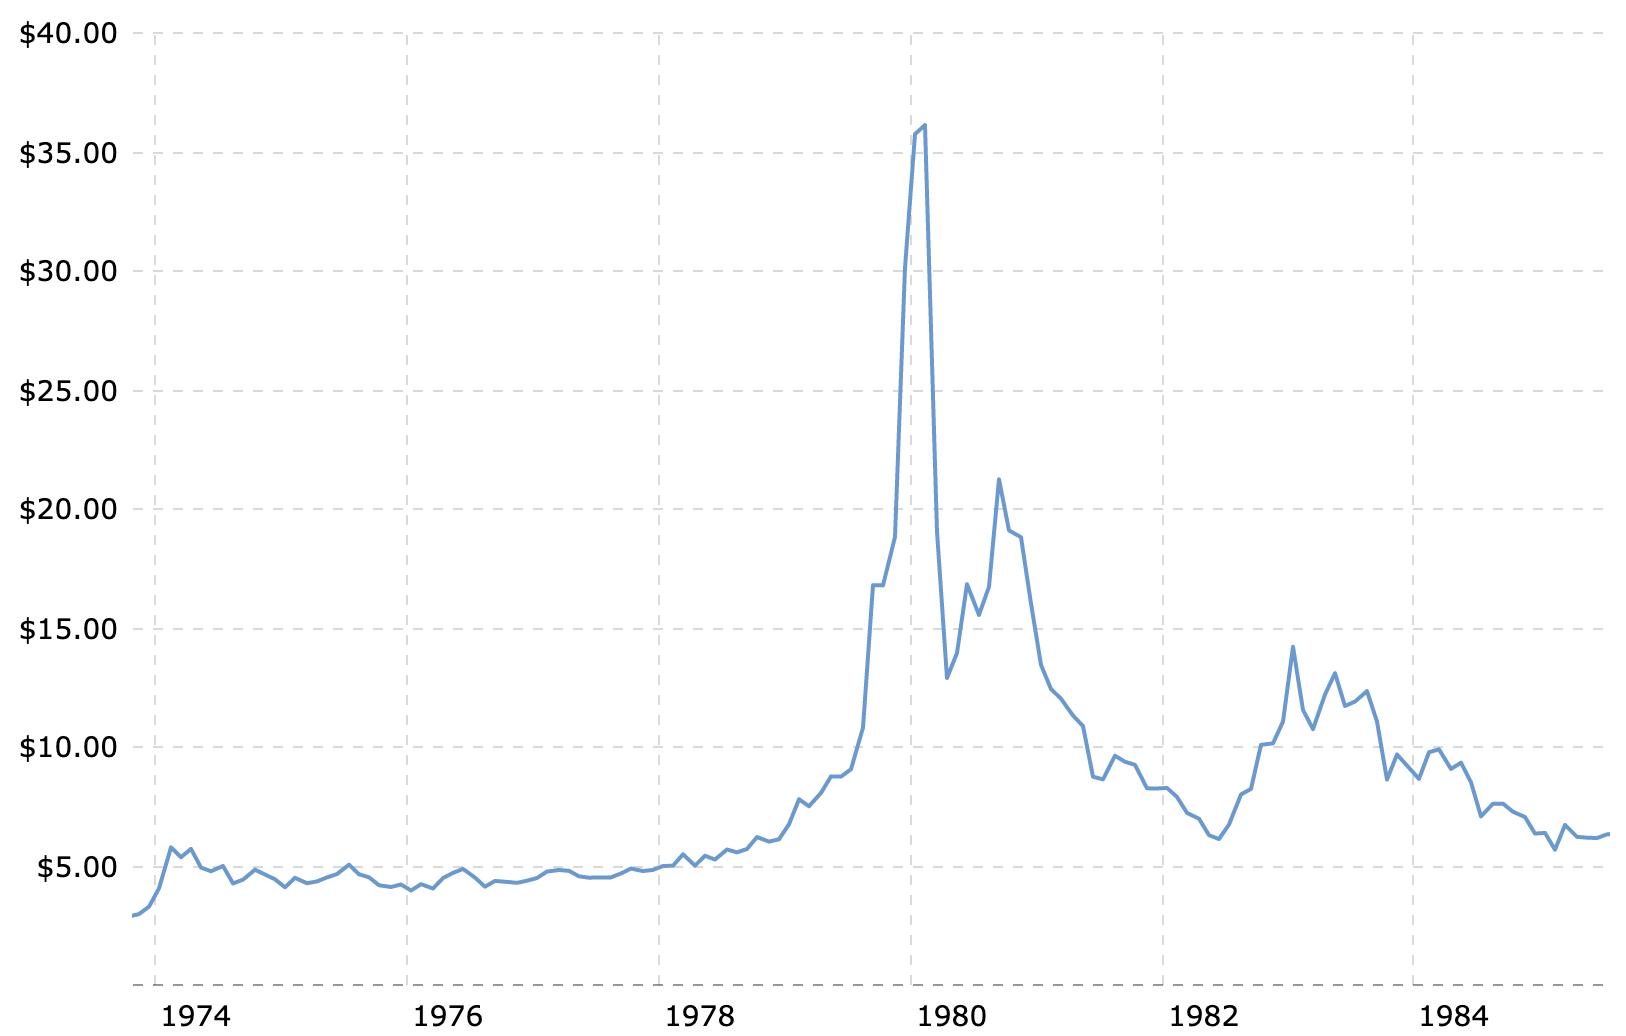 The significant rise in the price of silver towards the end of the 1970s. Source: Macrotrends